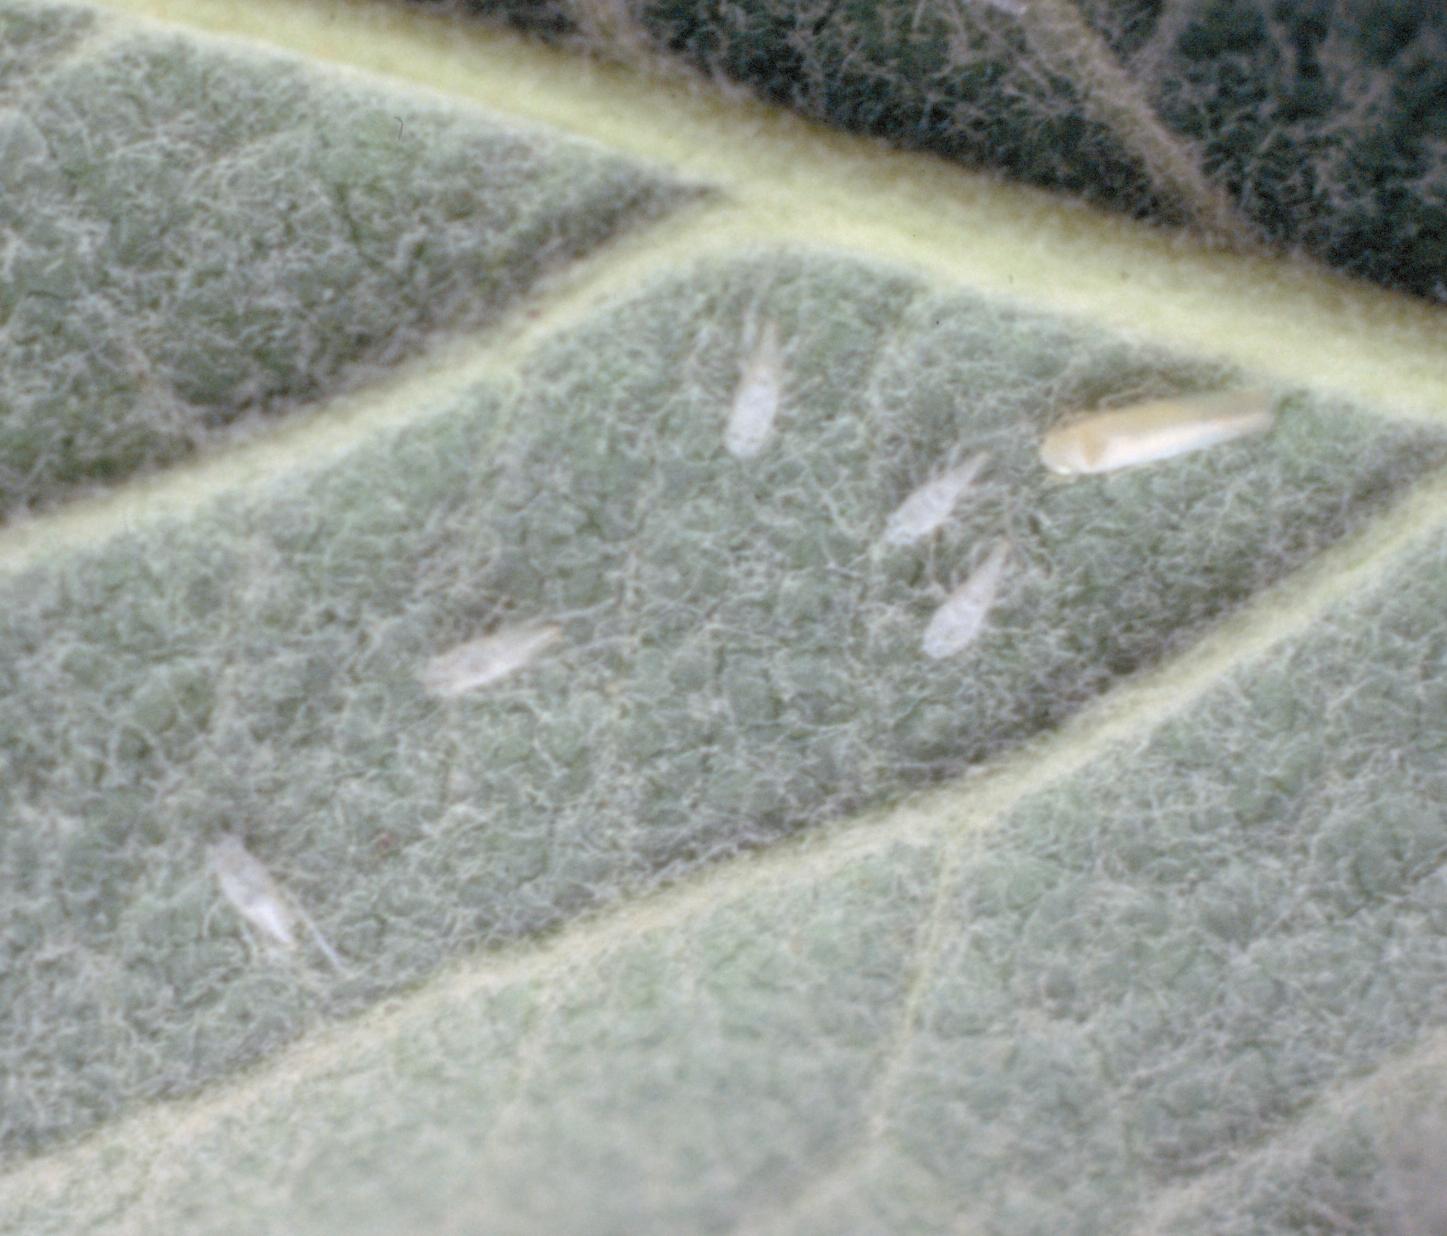 White apple leafhopper juveniles and adult (Bessin, UKY)